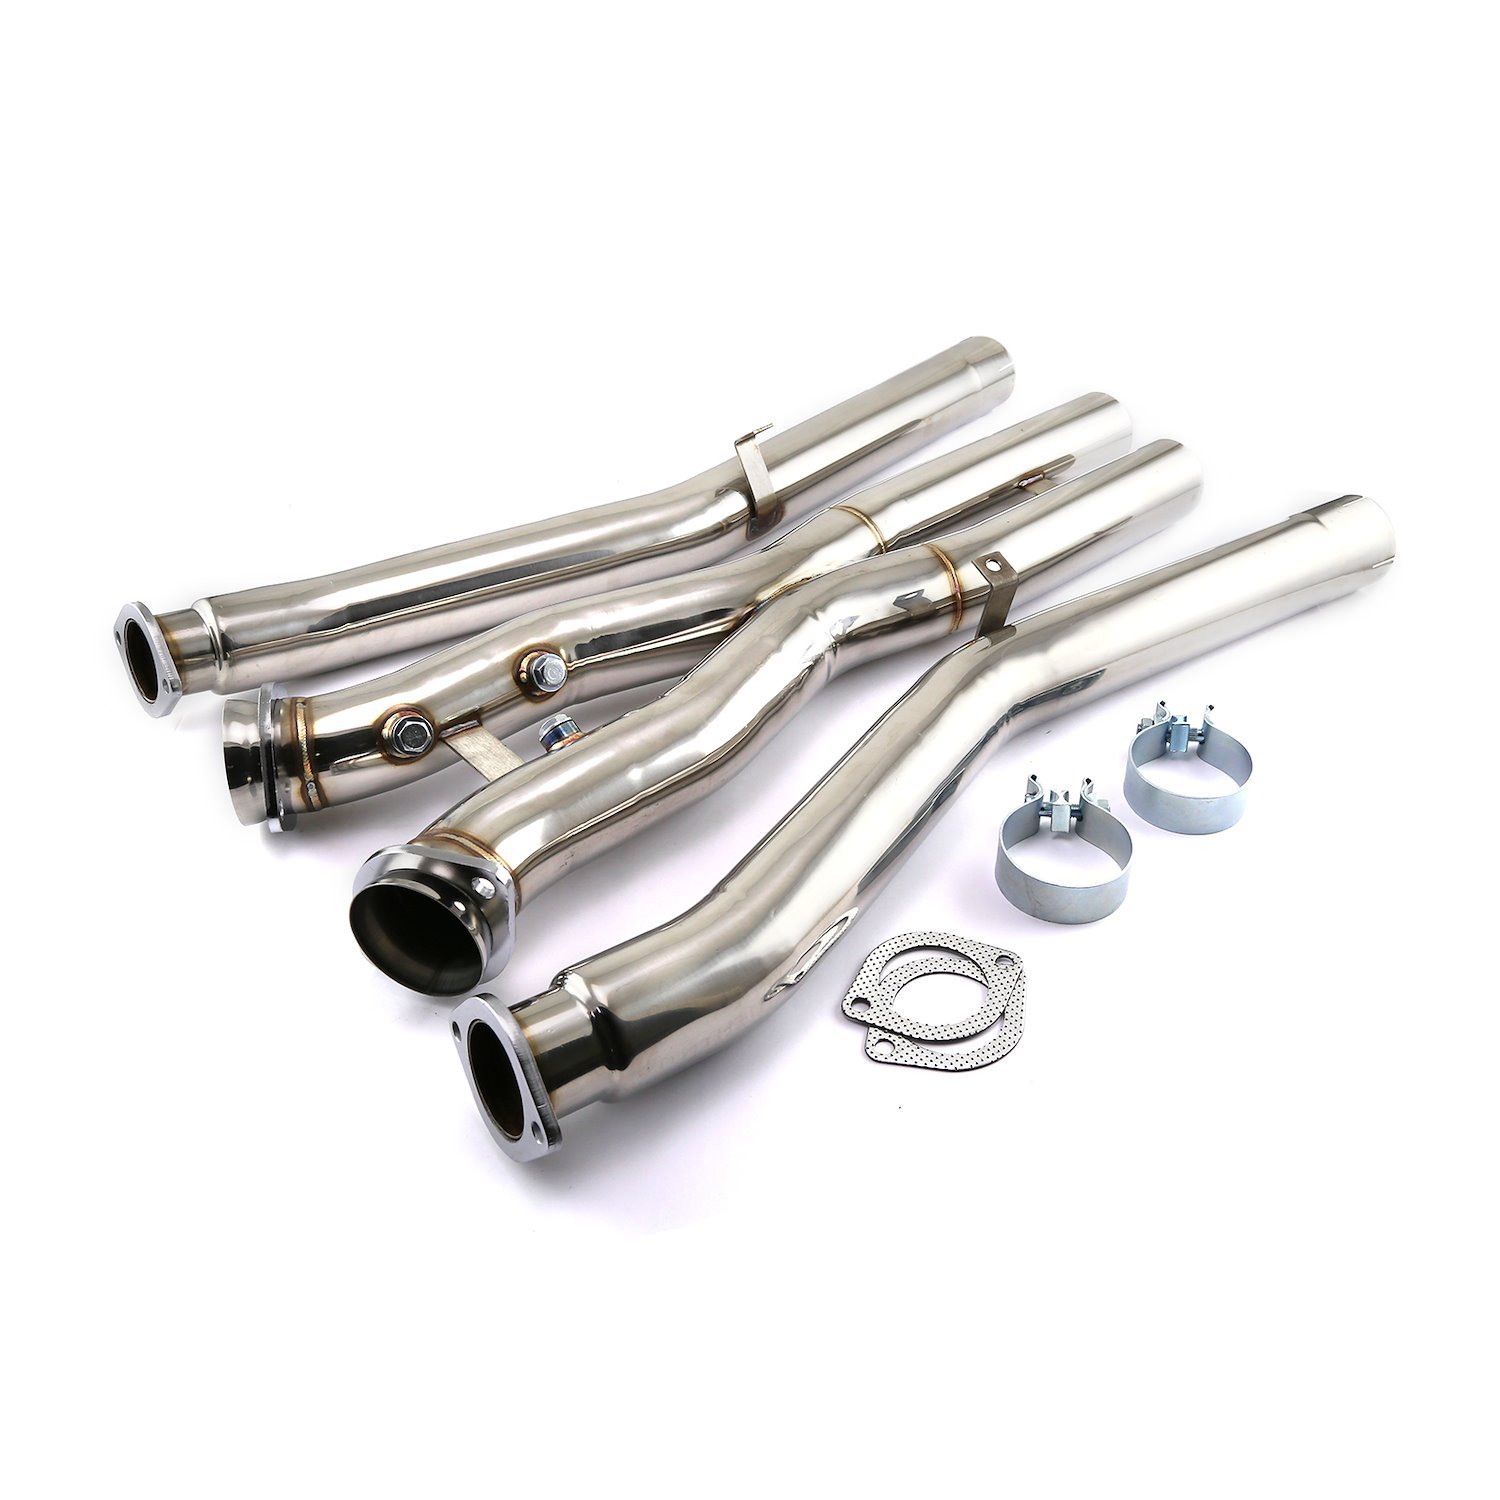 CHEVY 1997 2004 LS CORVETTE 409 STAINLESS STEEL X PIPE KIT 3